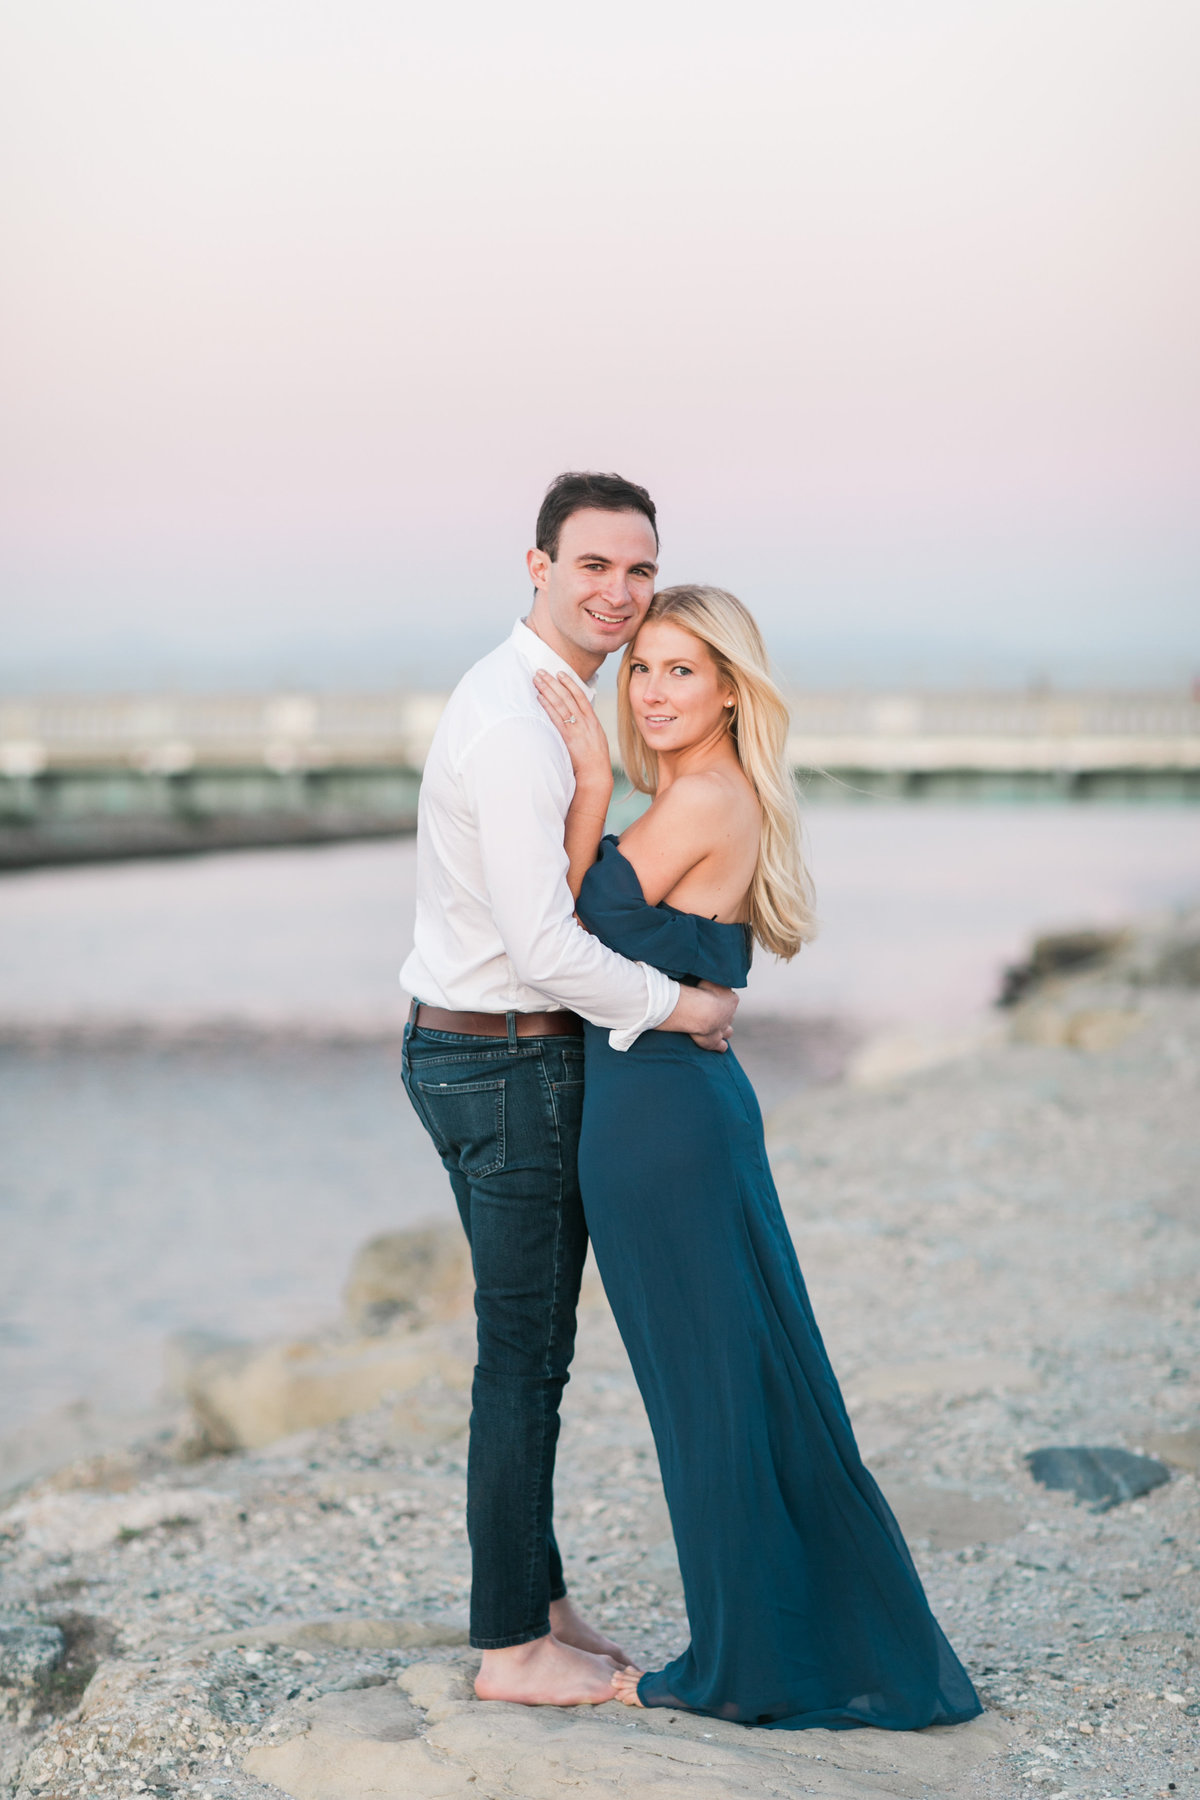 Venice Canal Beach Engagement Session_Valorie Darling Photography-7098